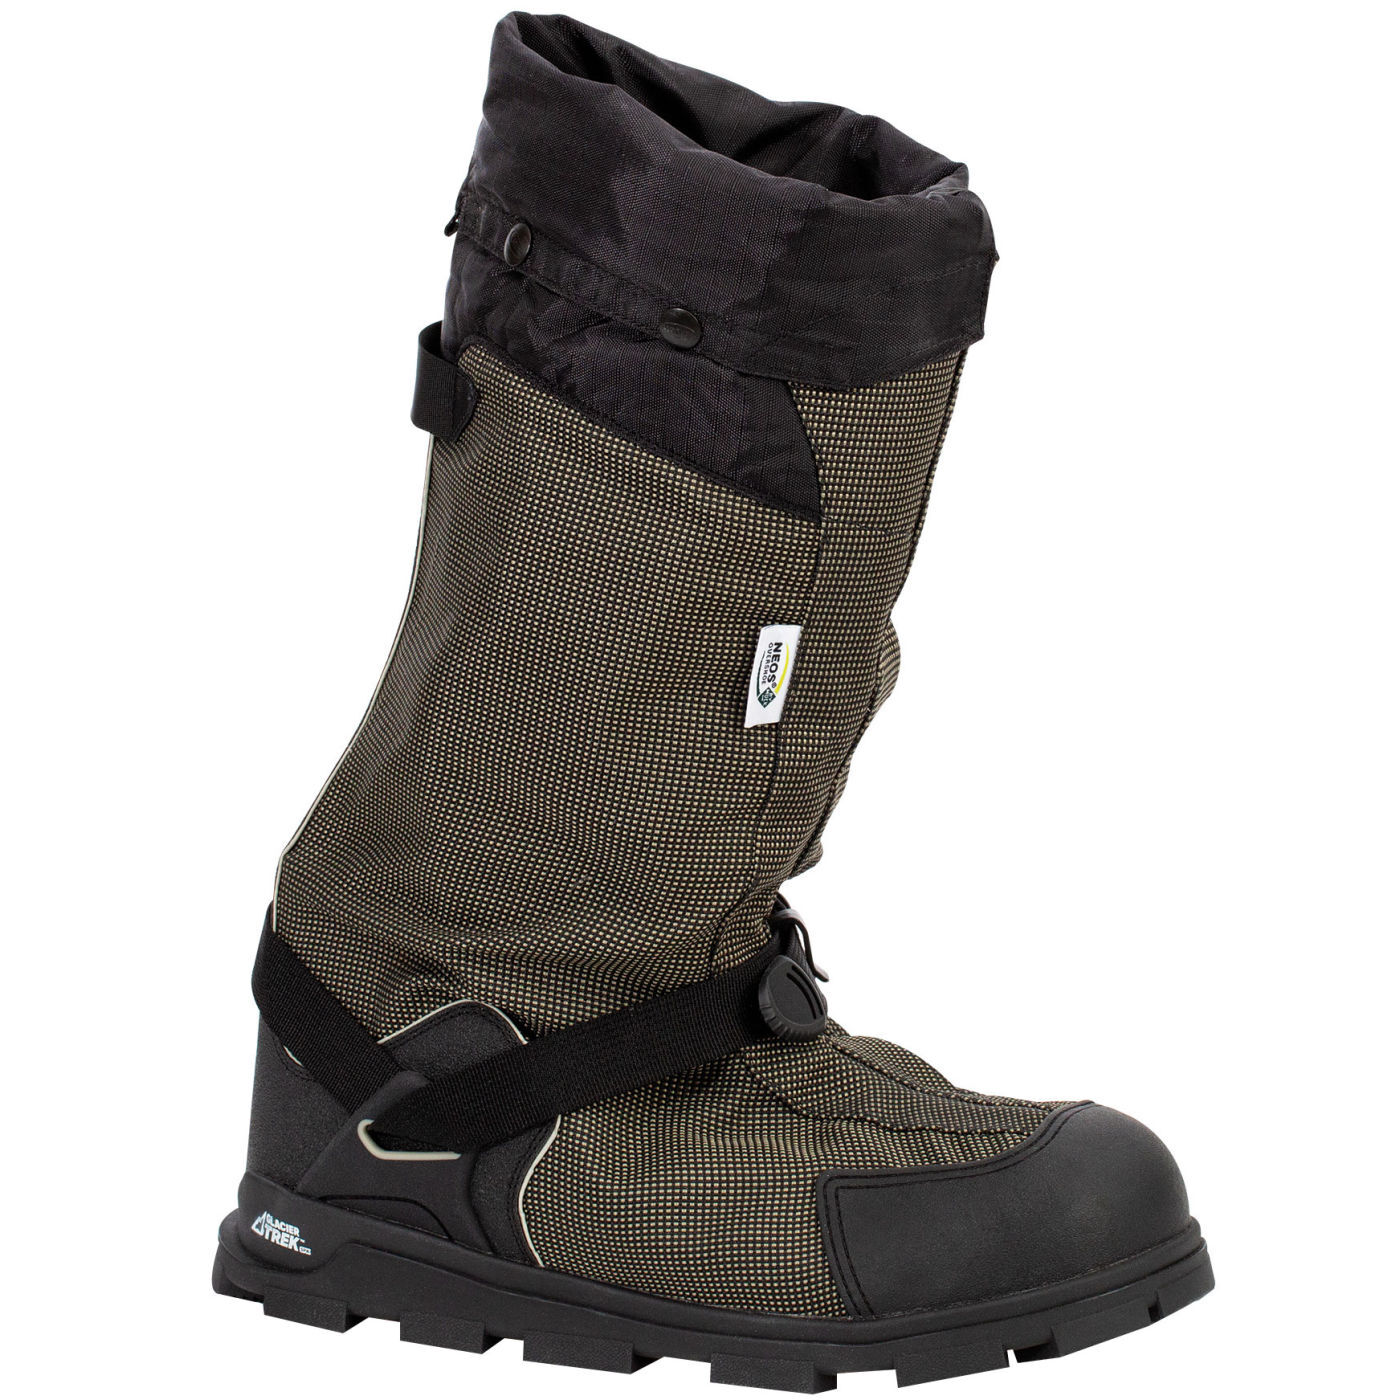 Overshoes from Columbia Safety and Supply